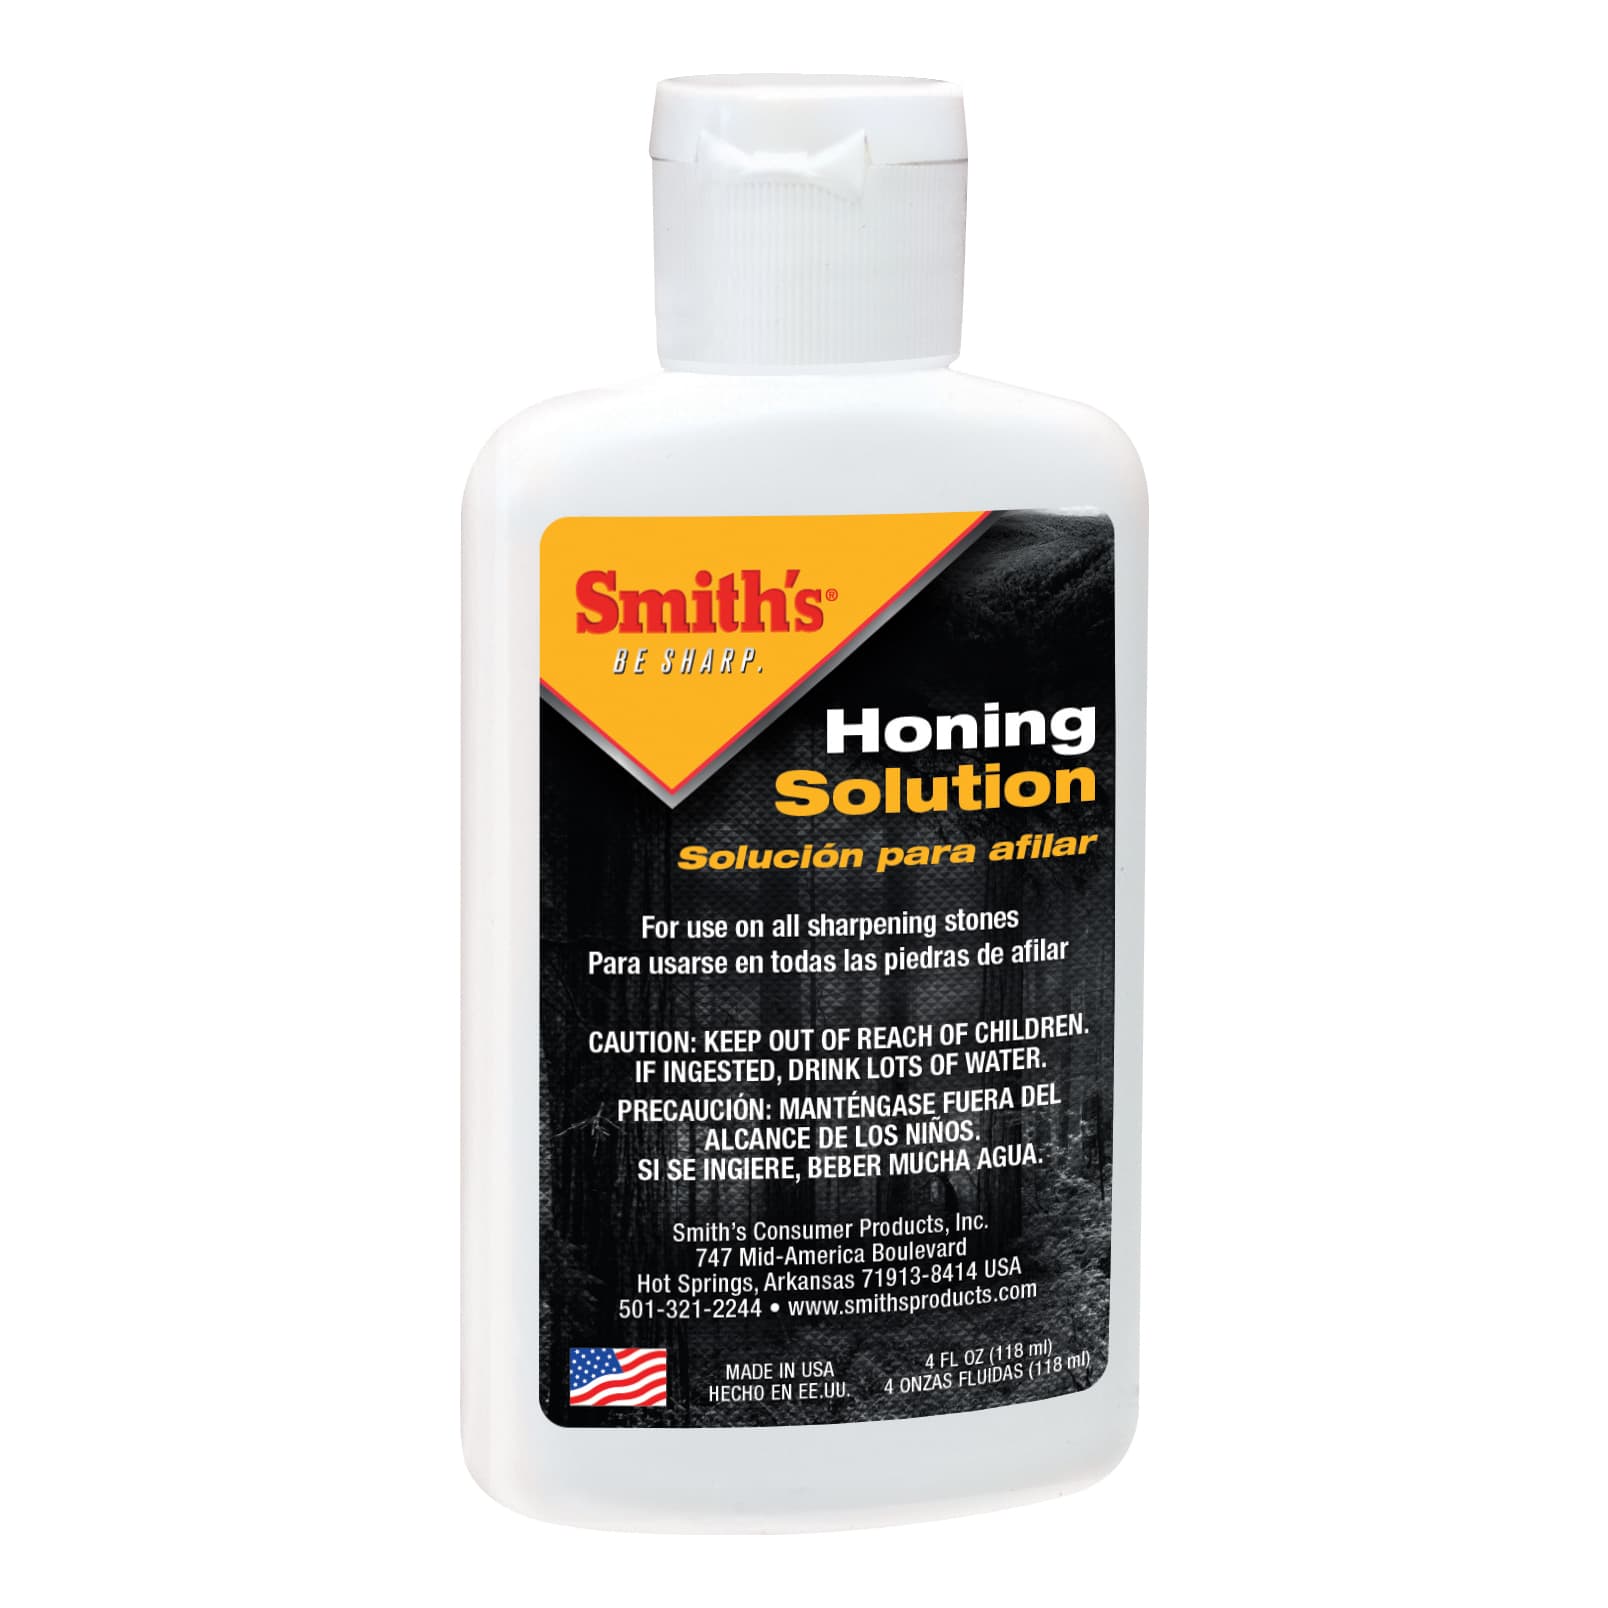 Smith's Honing Oil